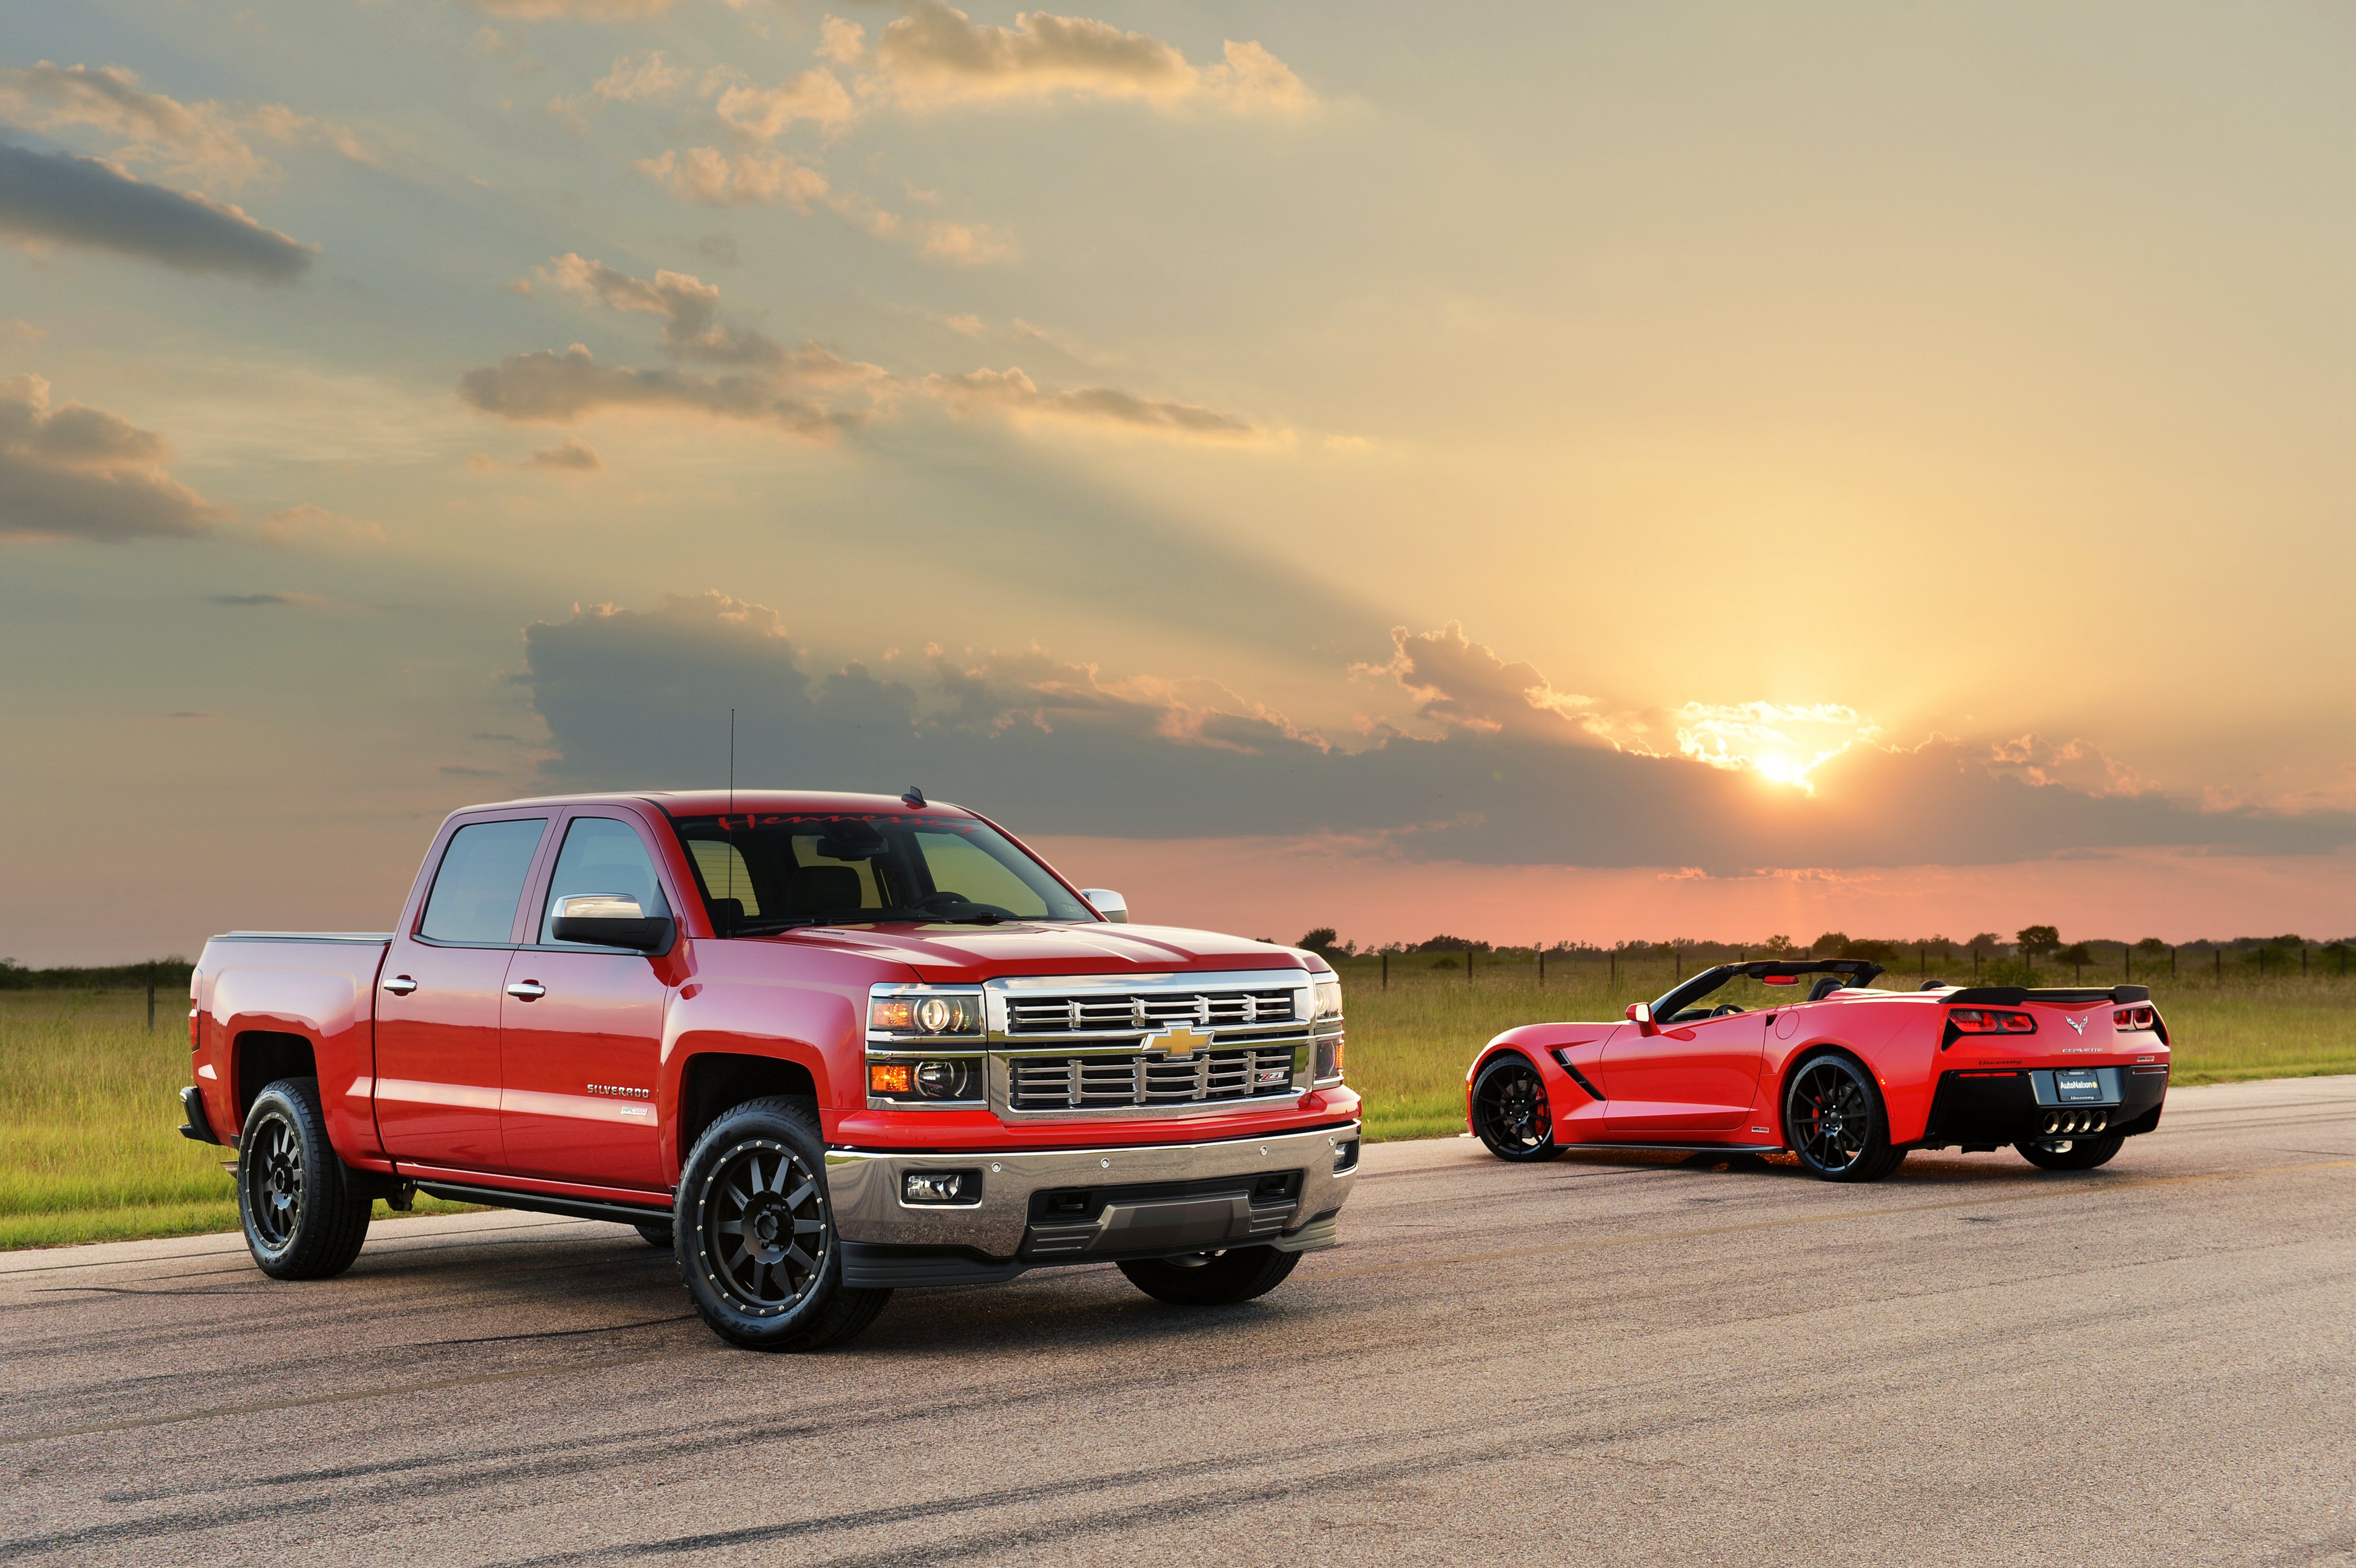 2015 Hennessey Chevrolet Silverado Hpe550 Pickup Muscle 4096x2726